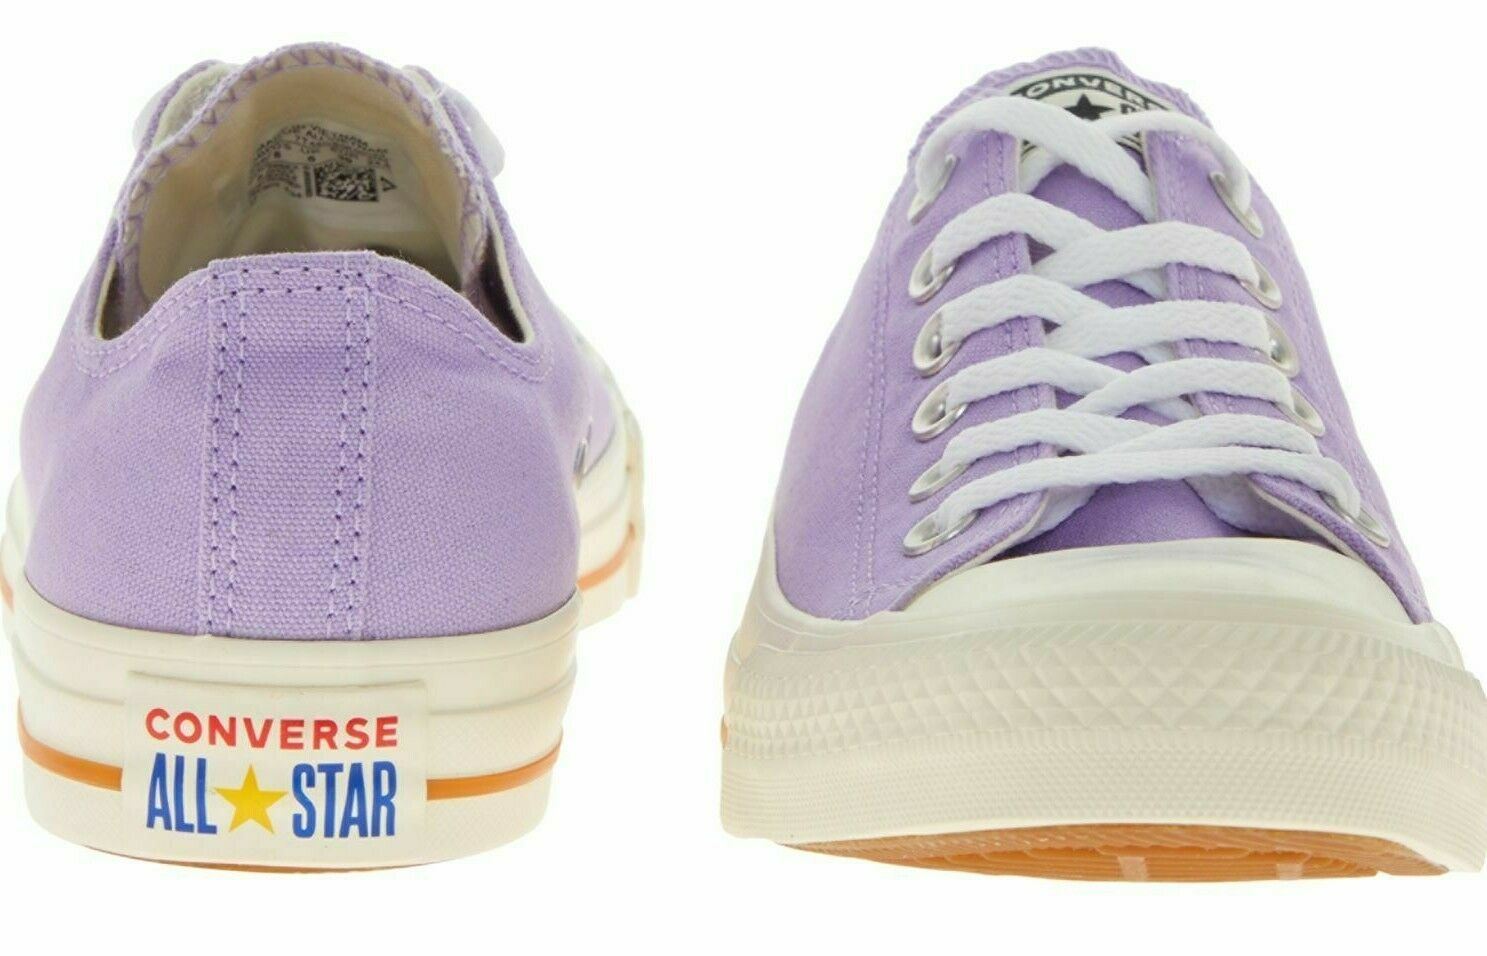 Women's CONVERSE ALL STAR Low Top Trainers, Washed Lilac/Egret UK 4 EU 36.5